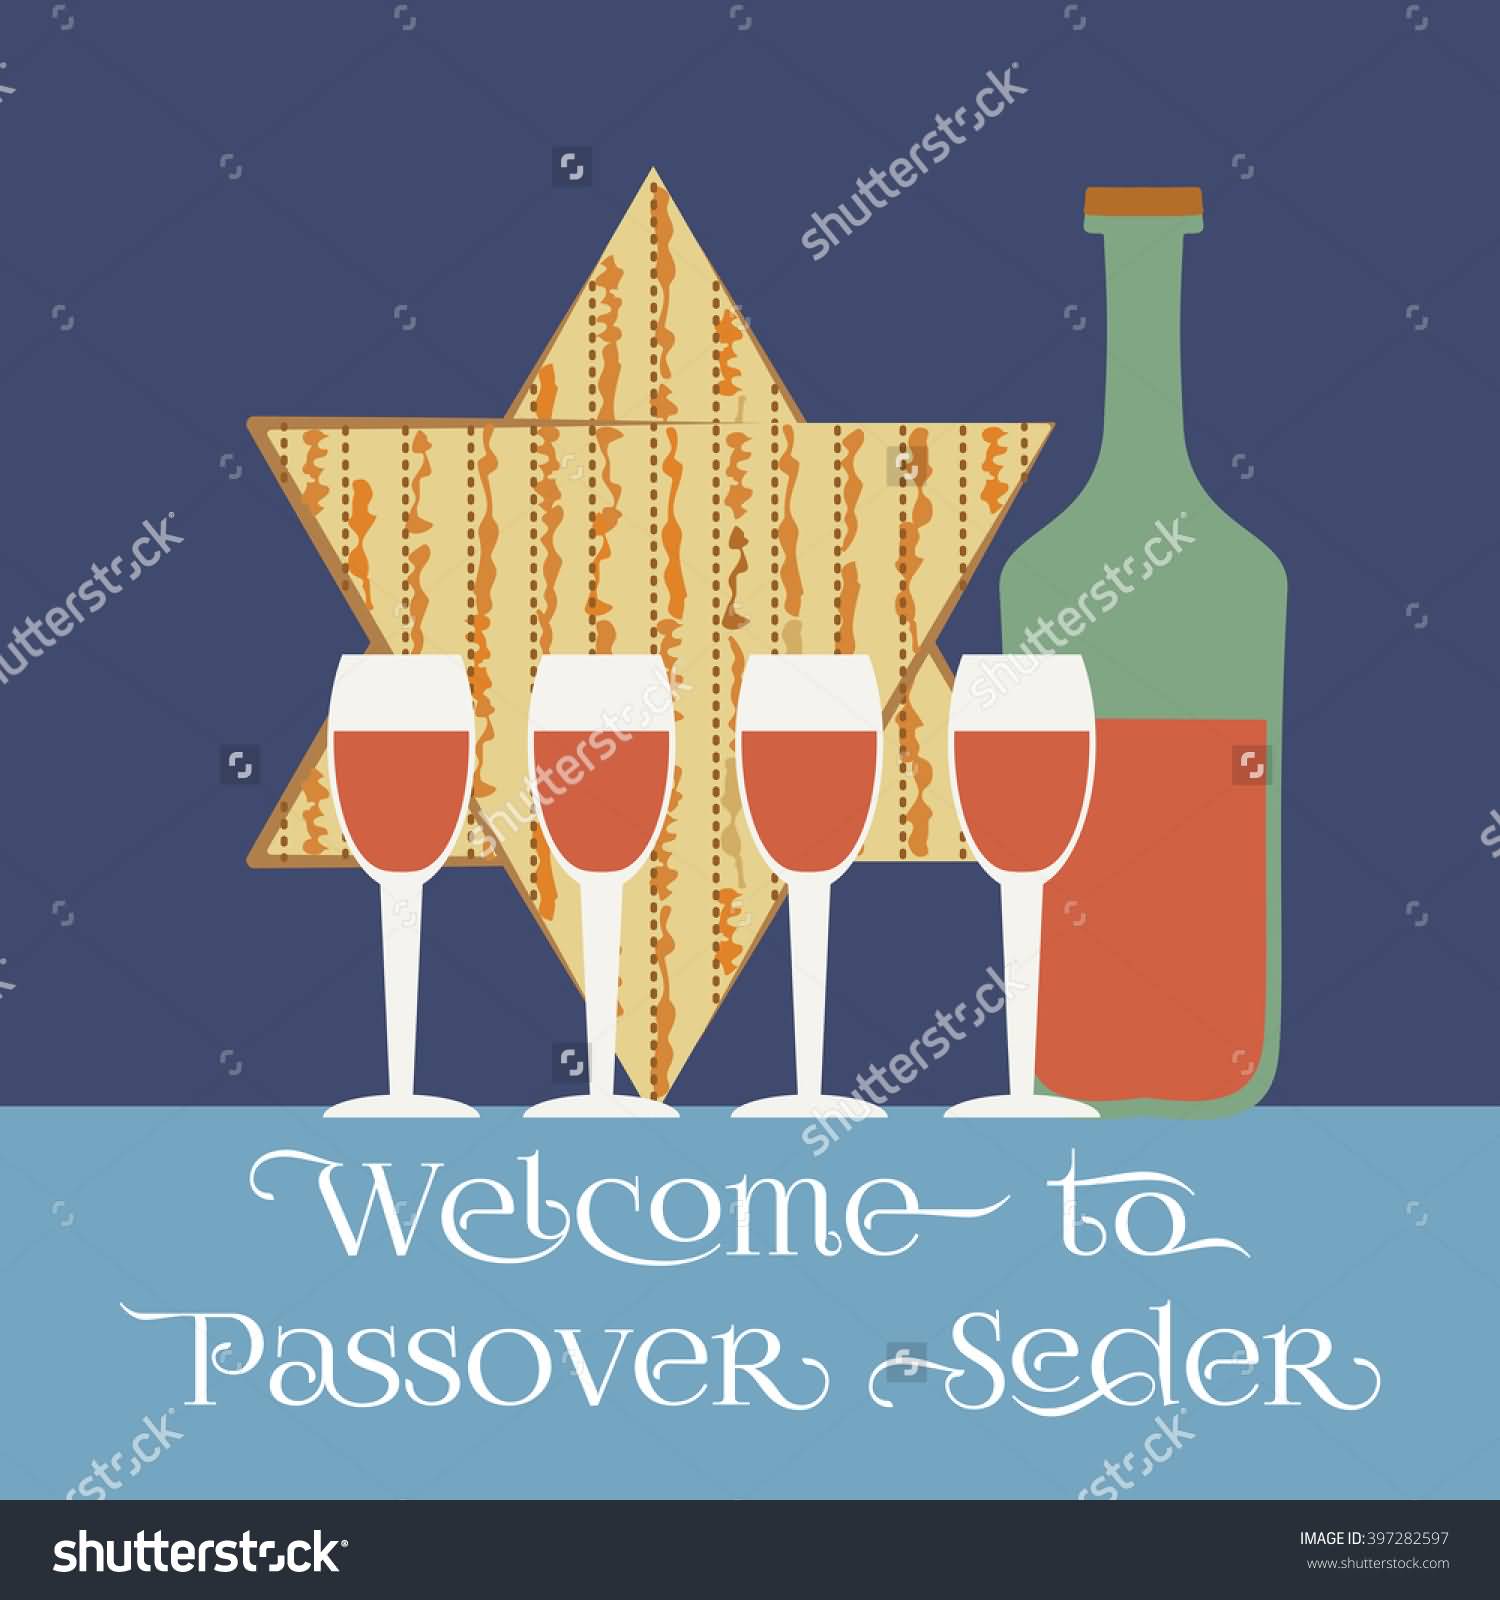 Welcome To Passover Seder Card